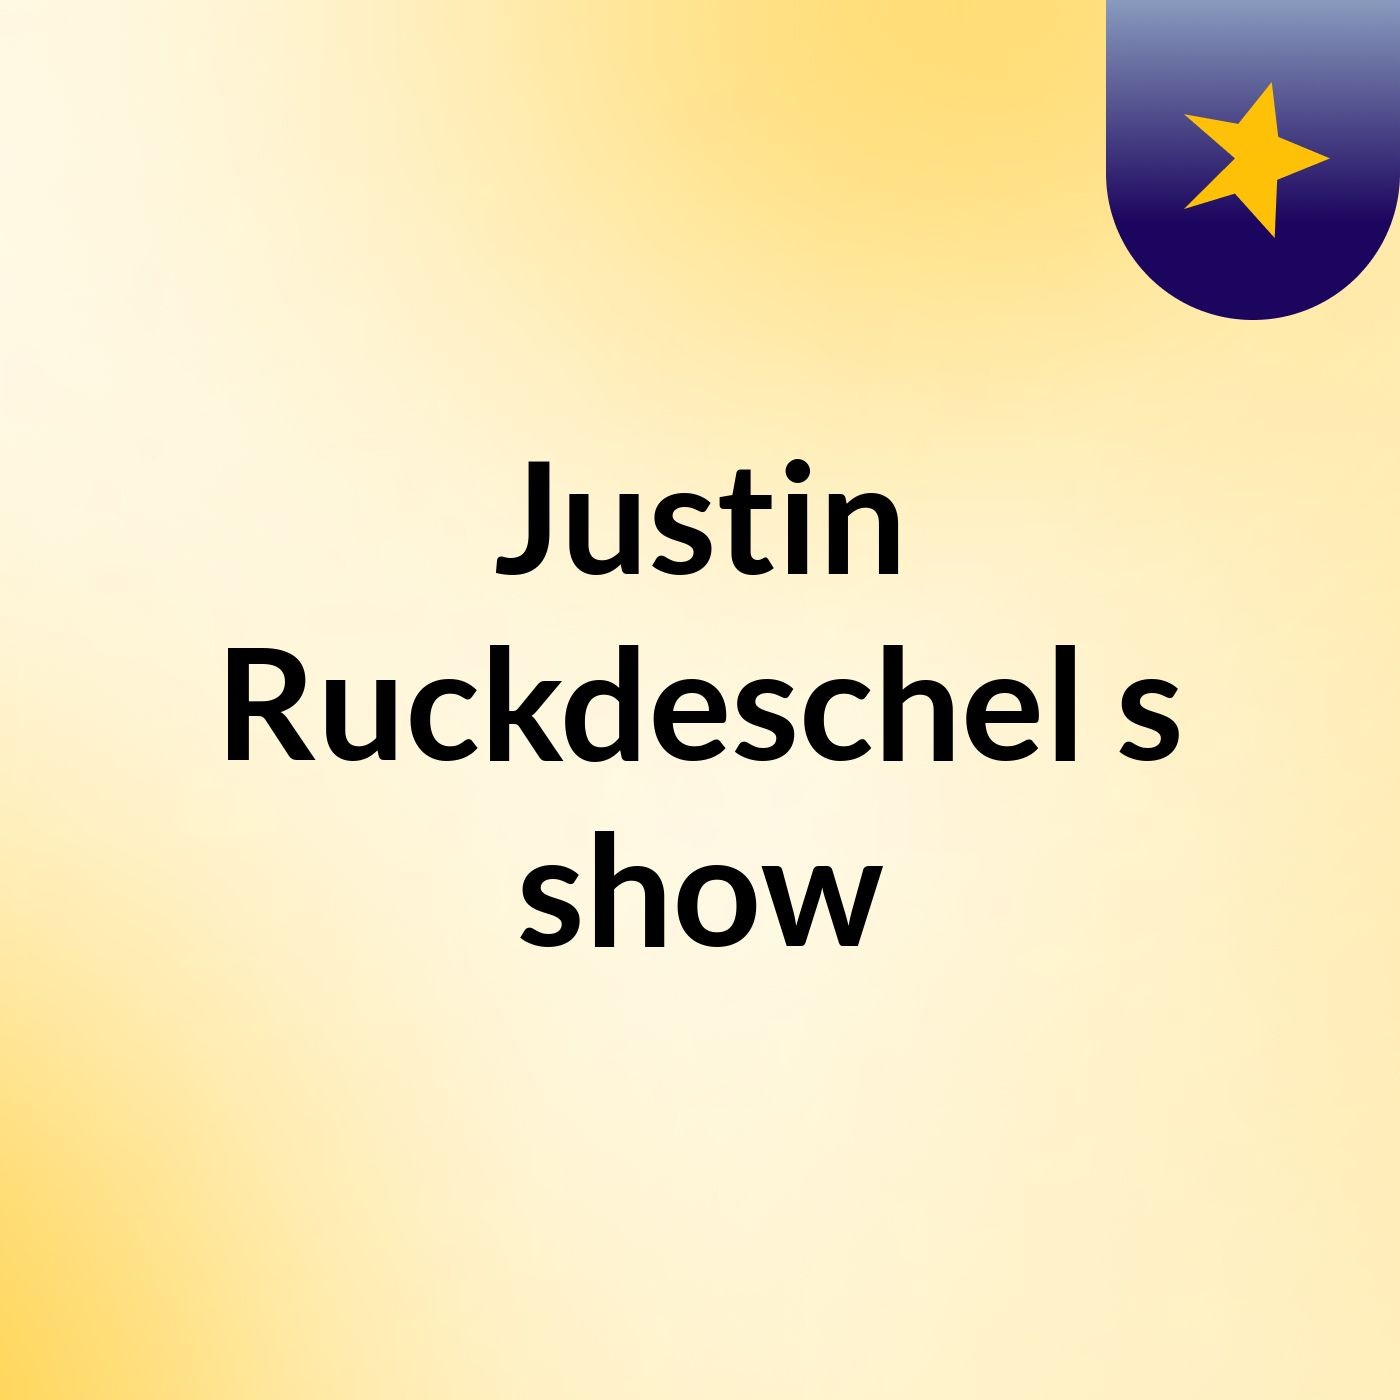 Going To Do This One- Justin Ruckdeschel's show